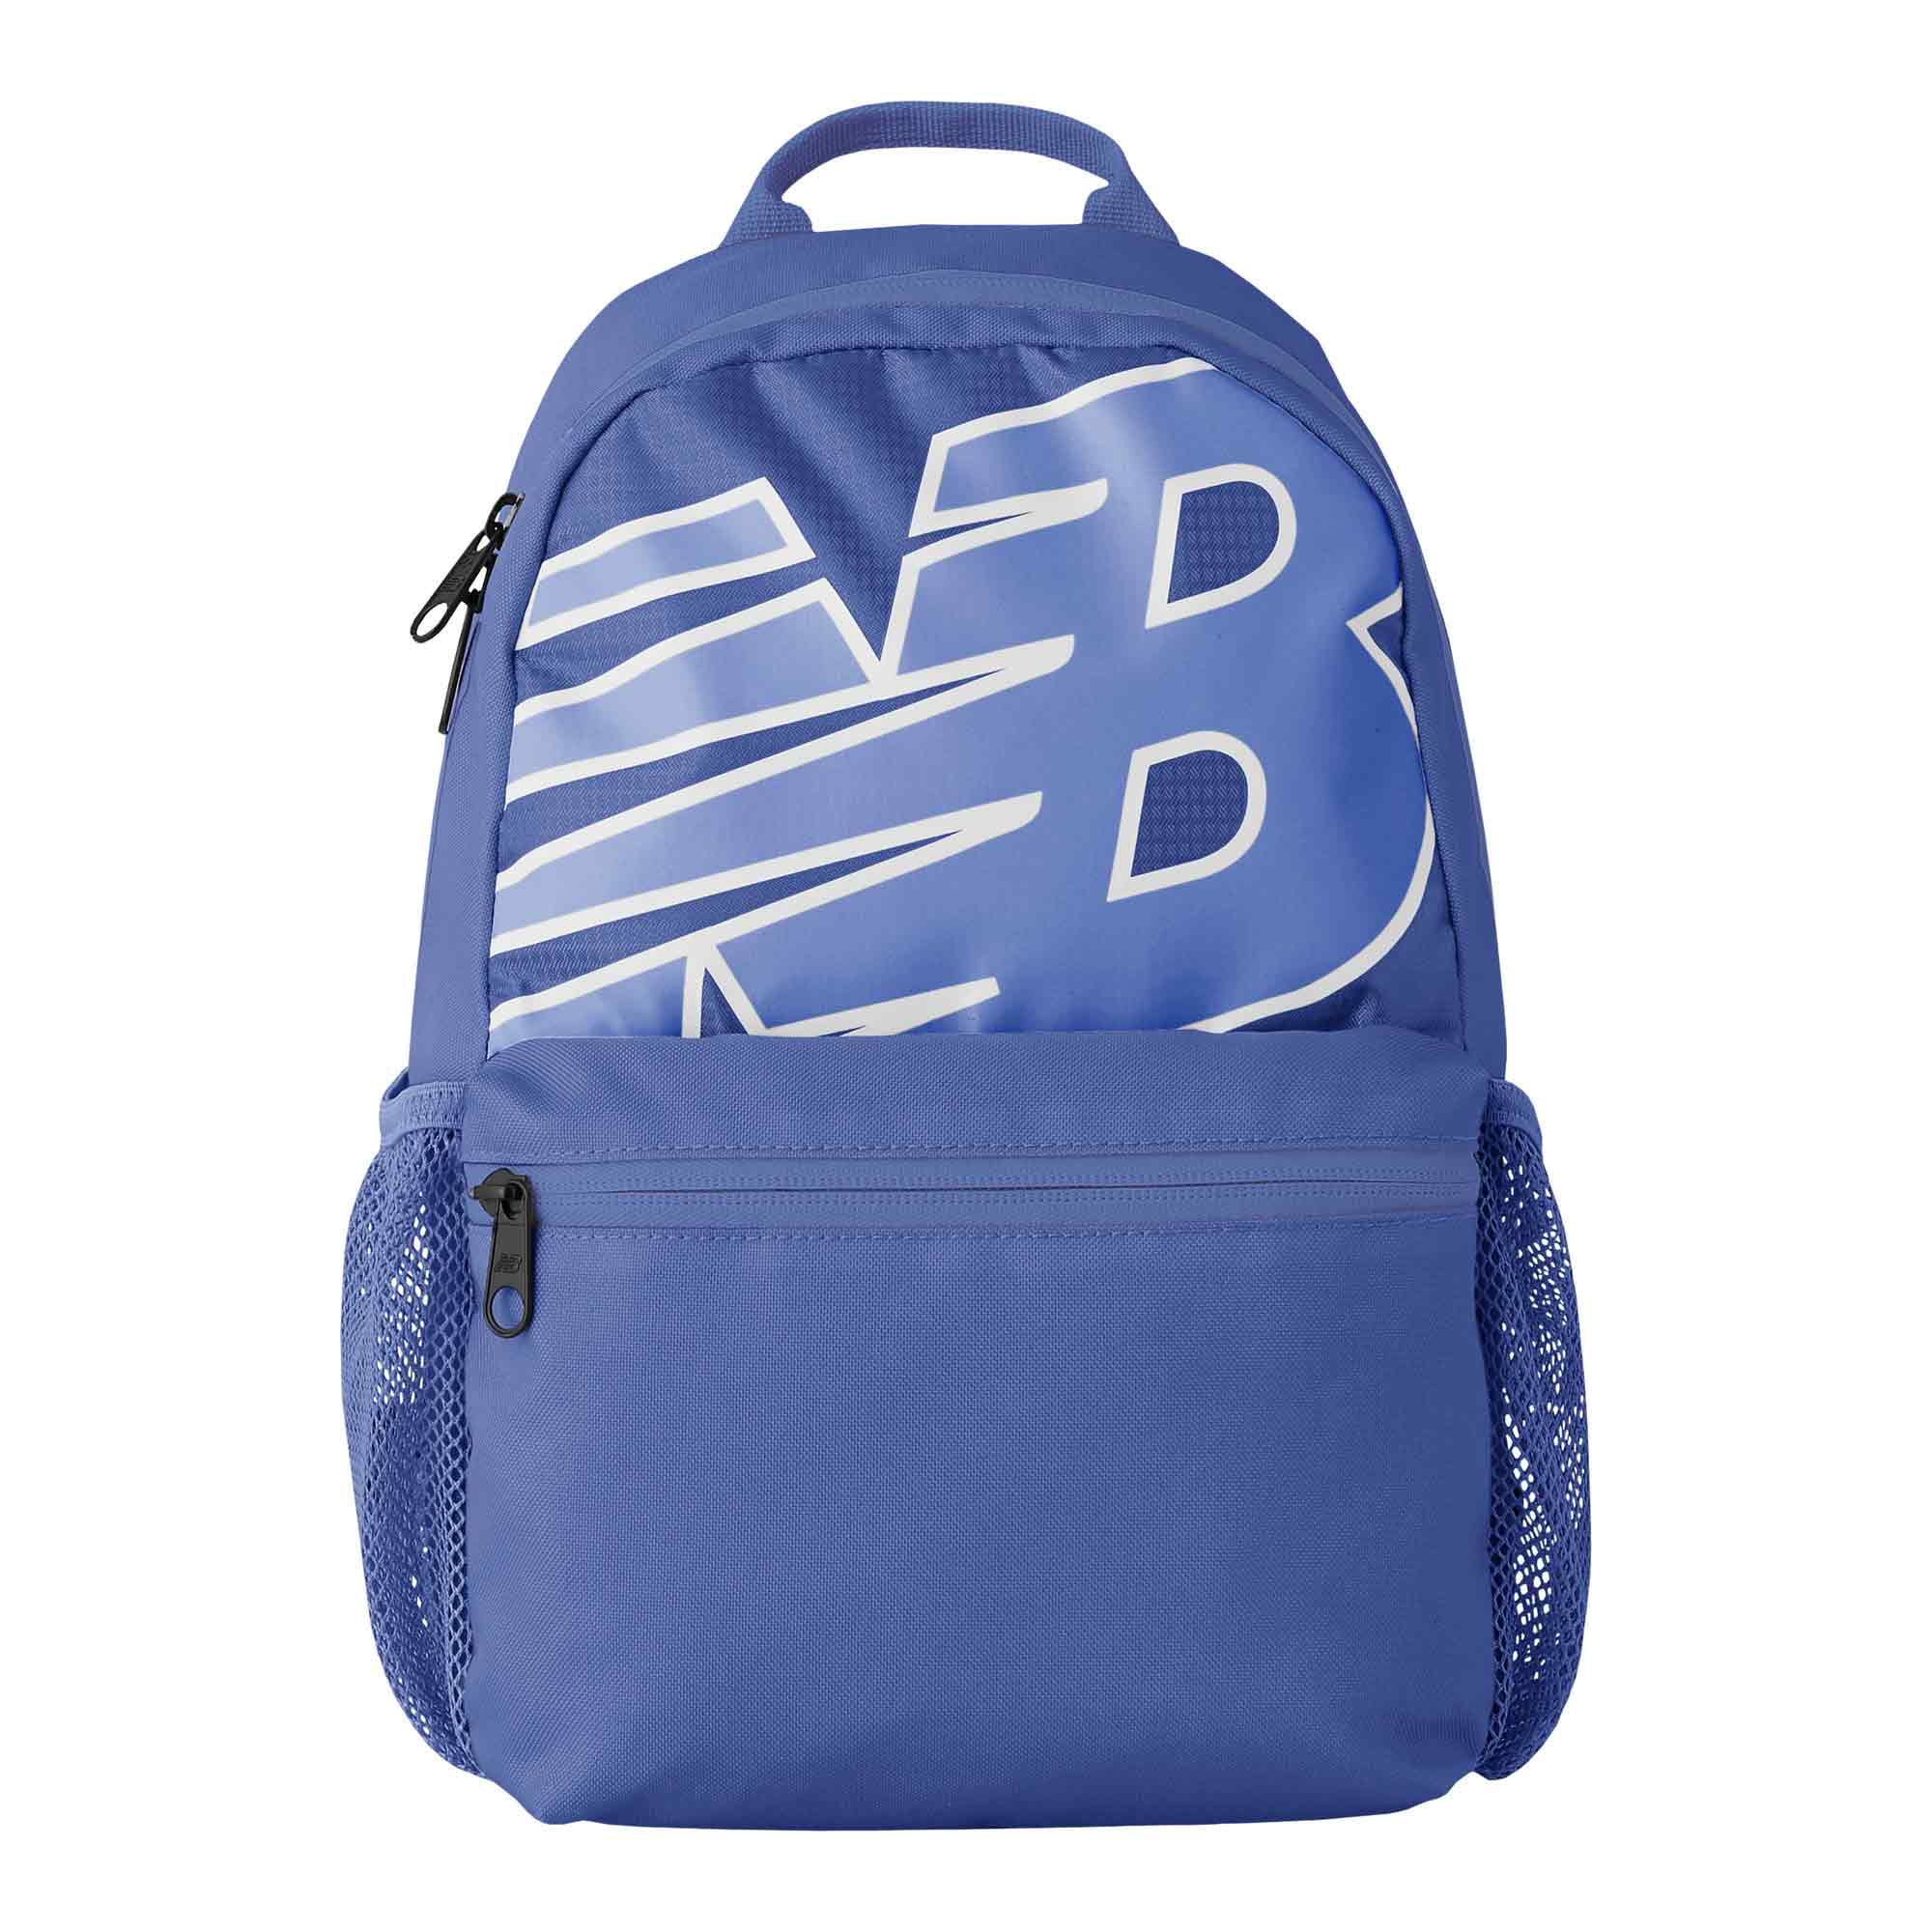 New Balance XS Backpack Blue 12 Litres